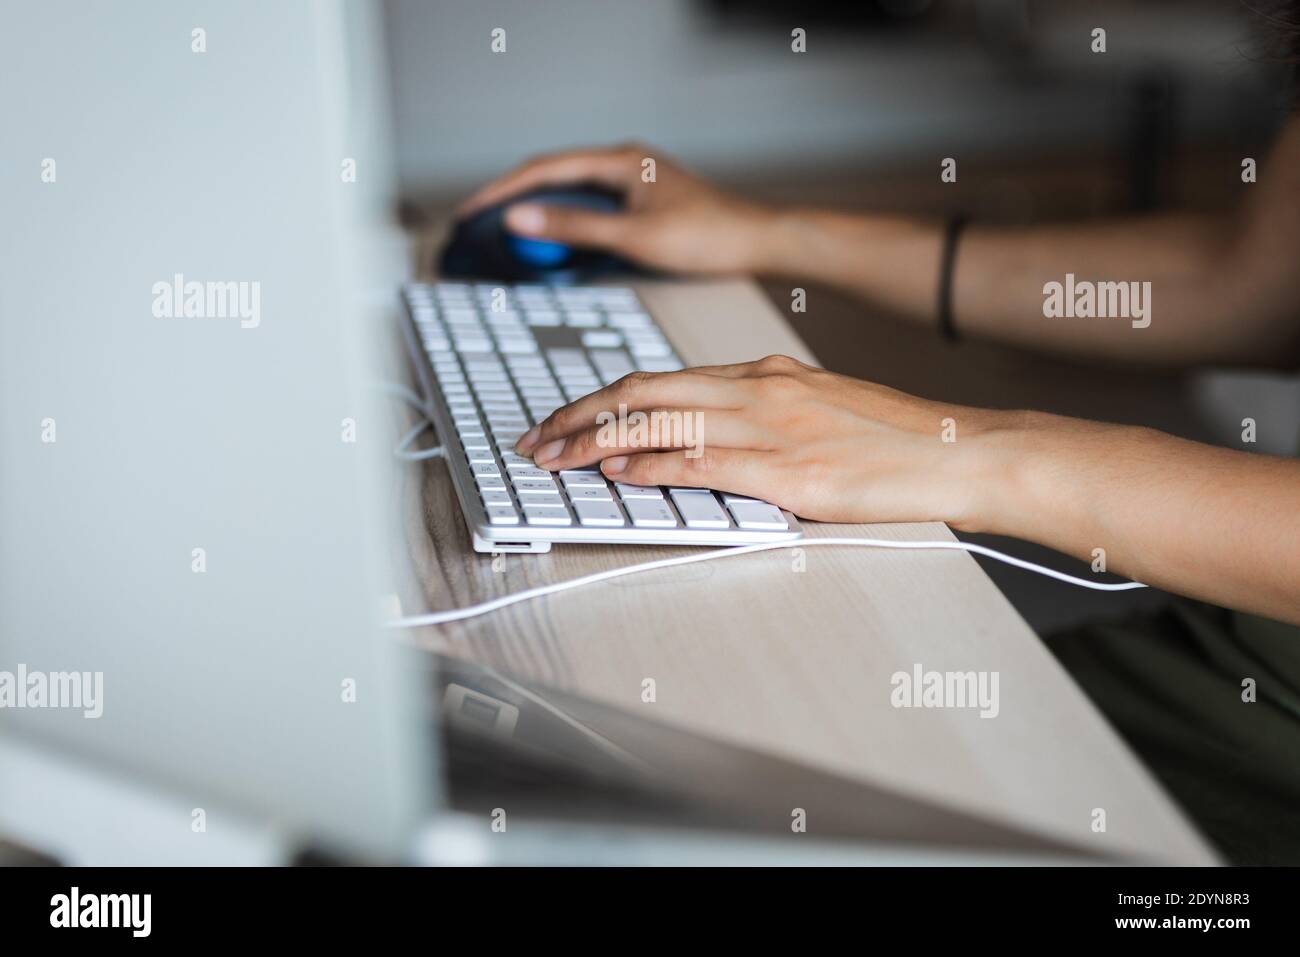 hands grasping keyboard and mouse Stock Photo